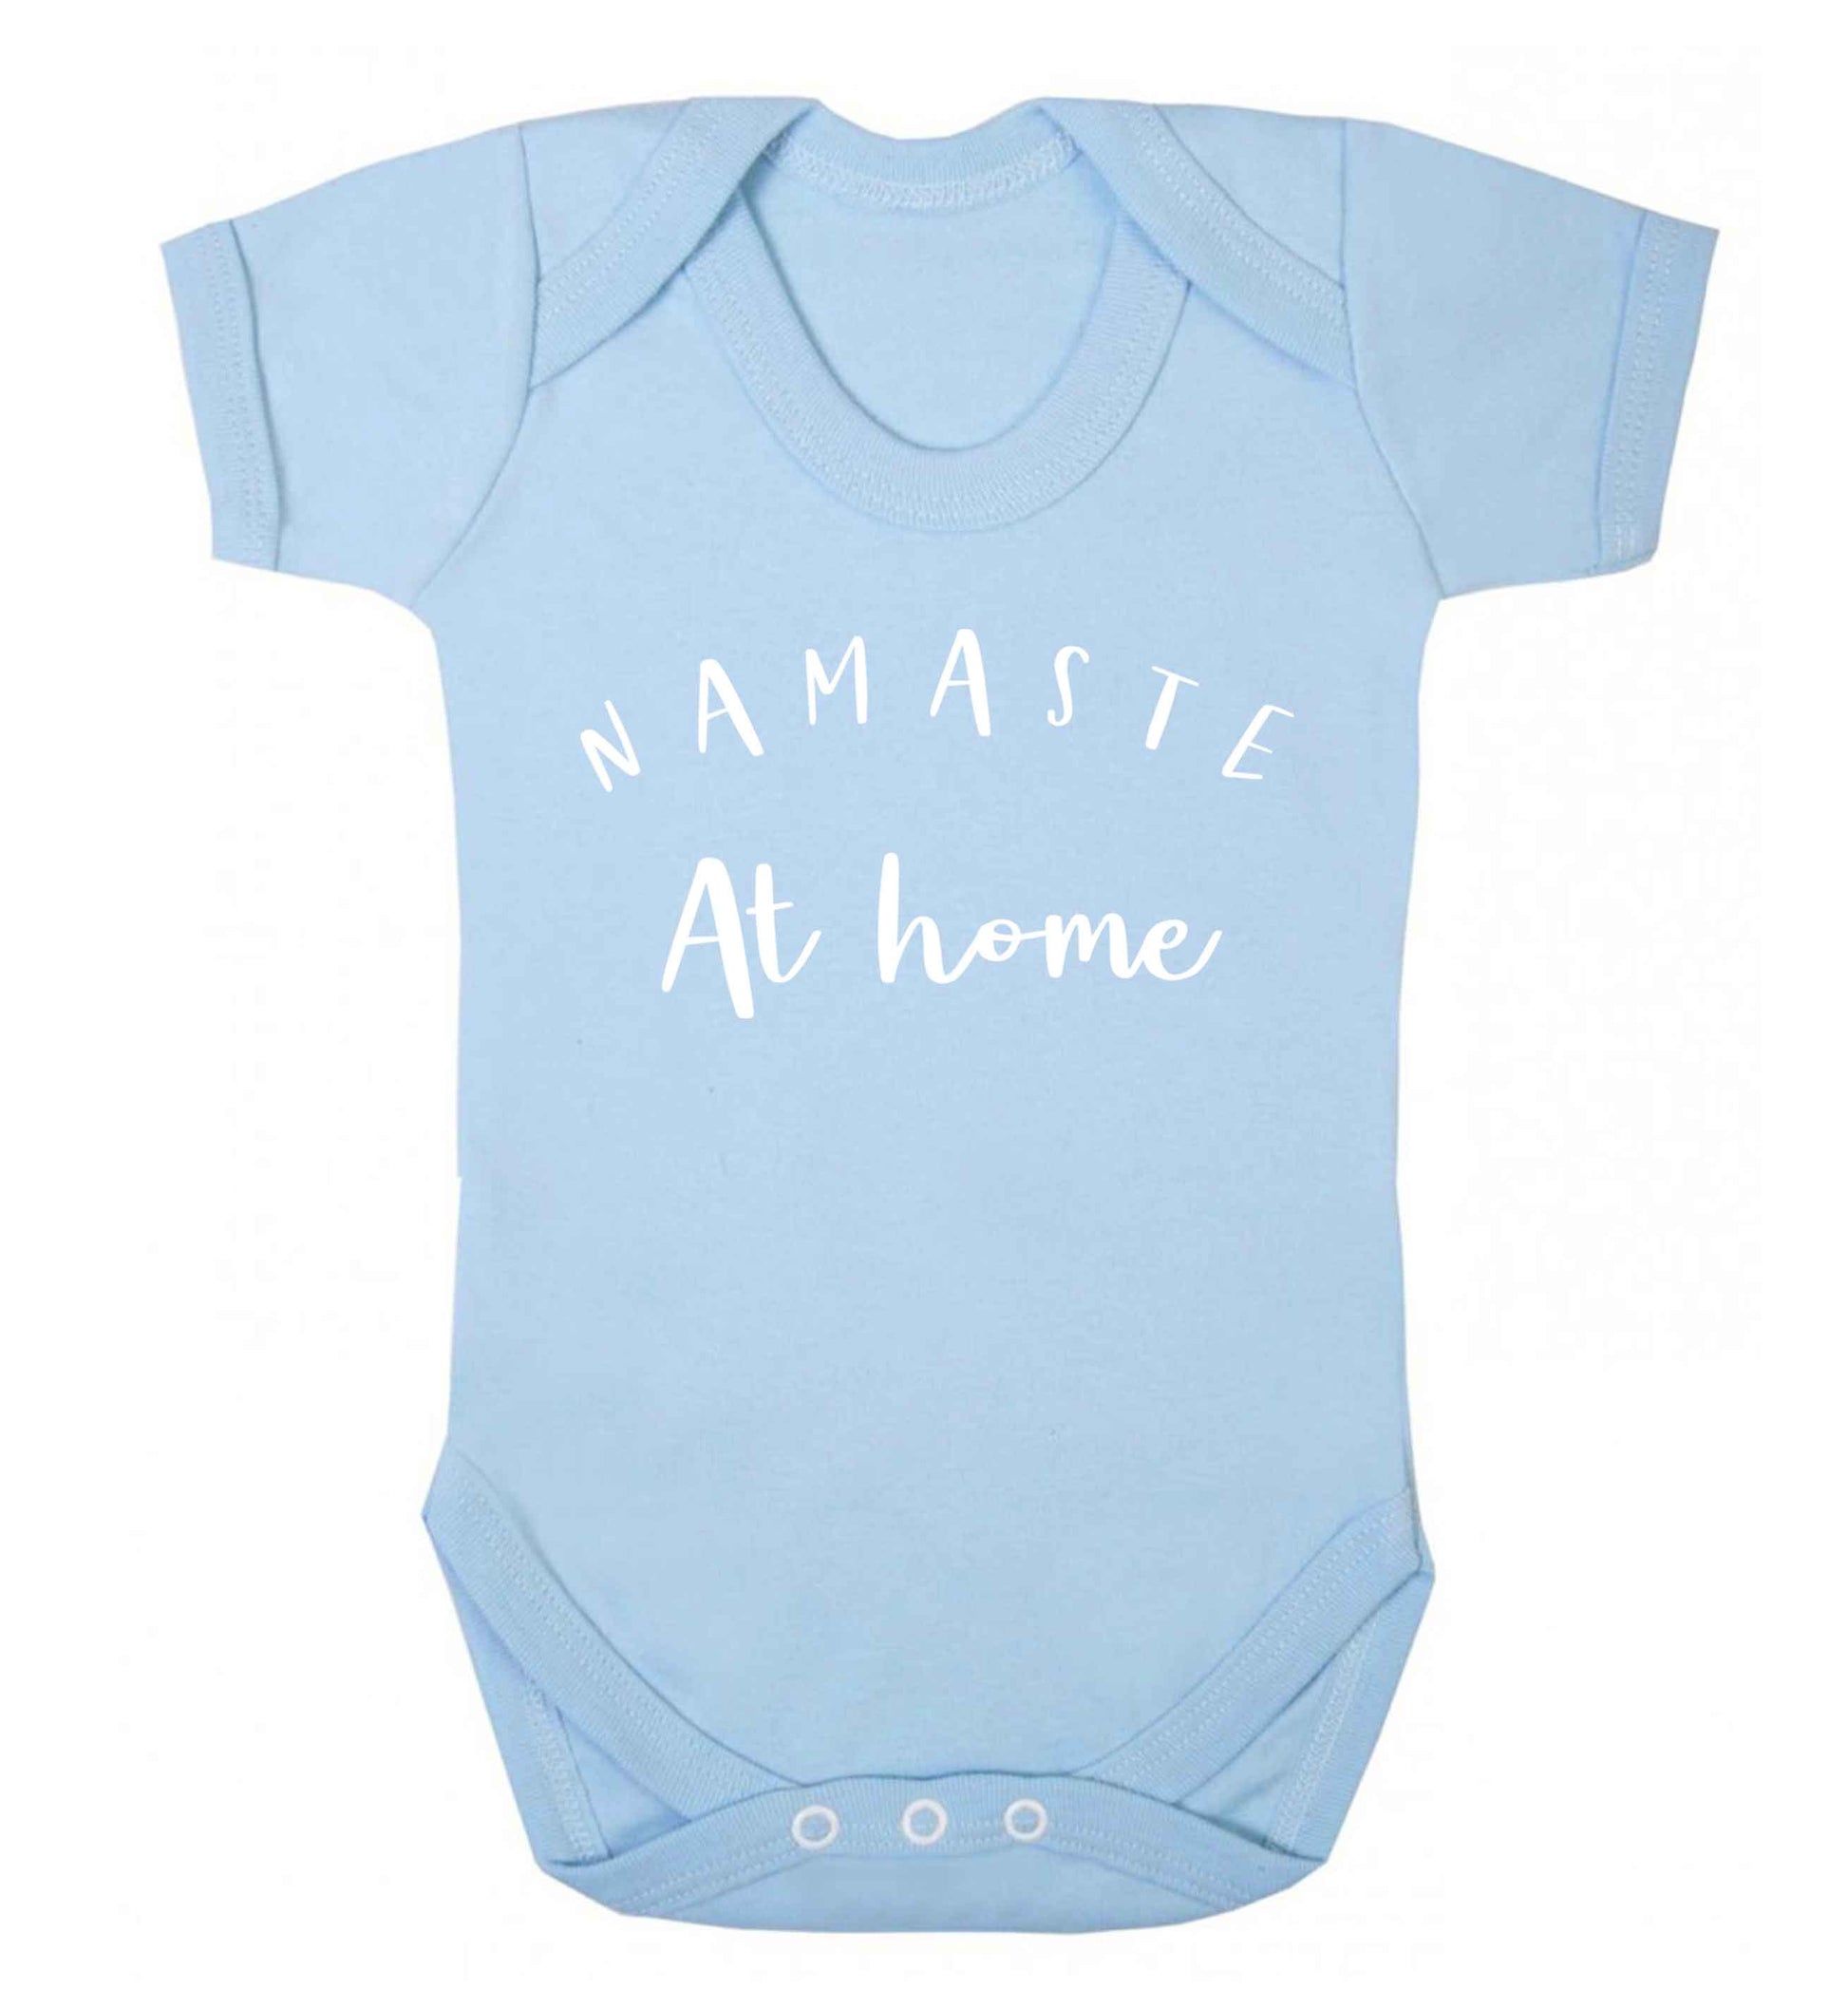 Namaste at home Baby Vest pale blue 18-24 months